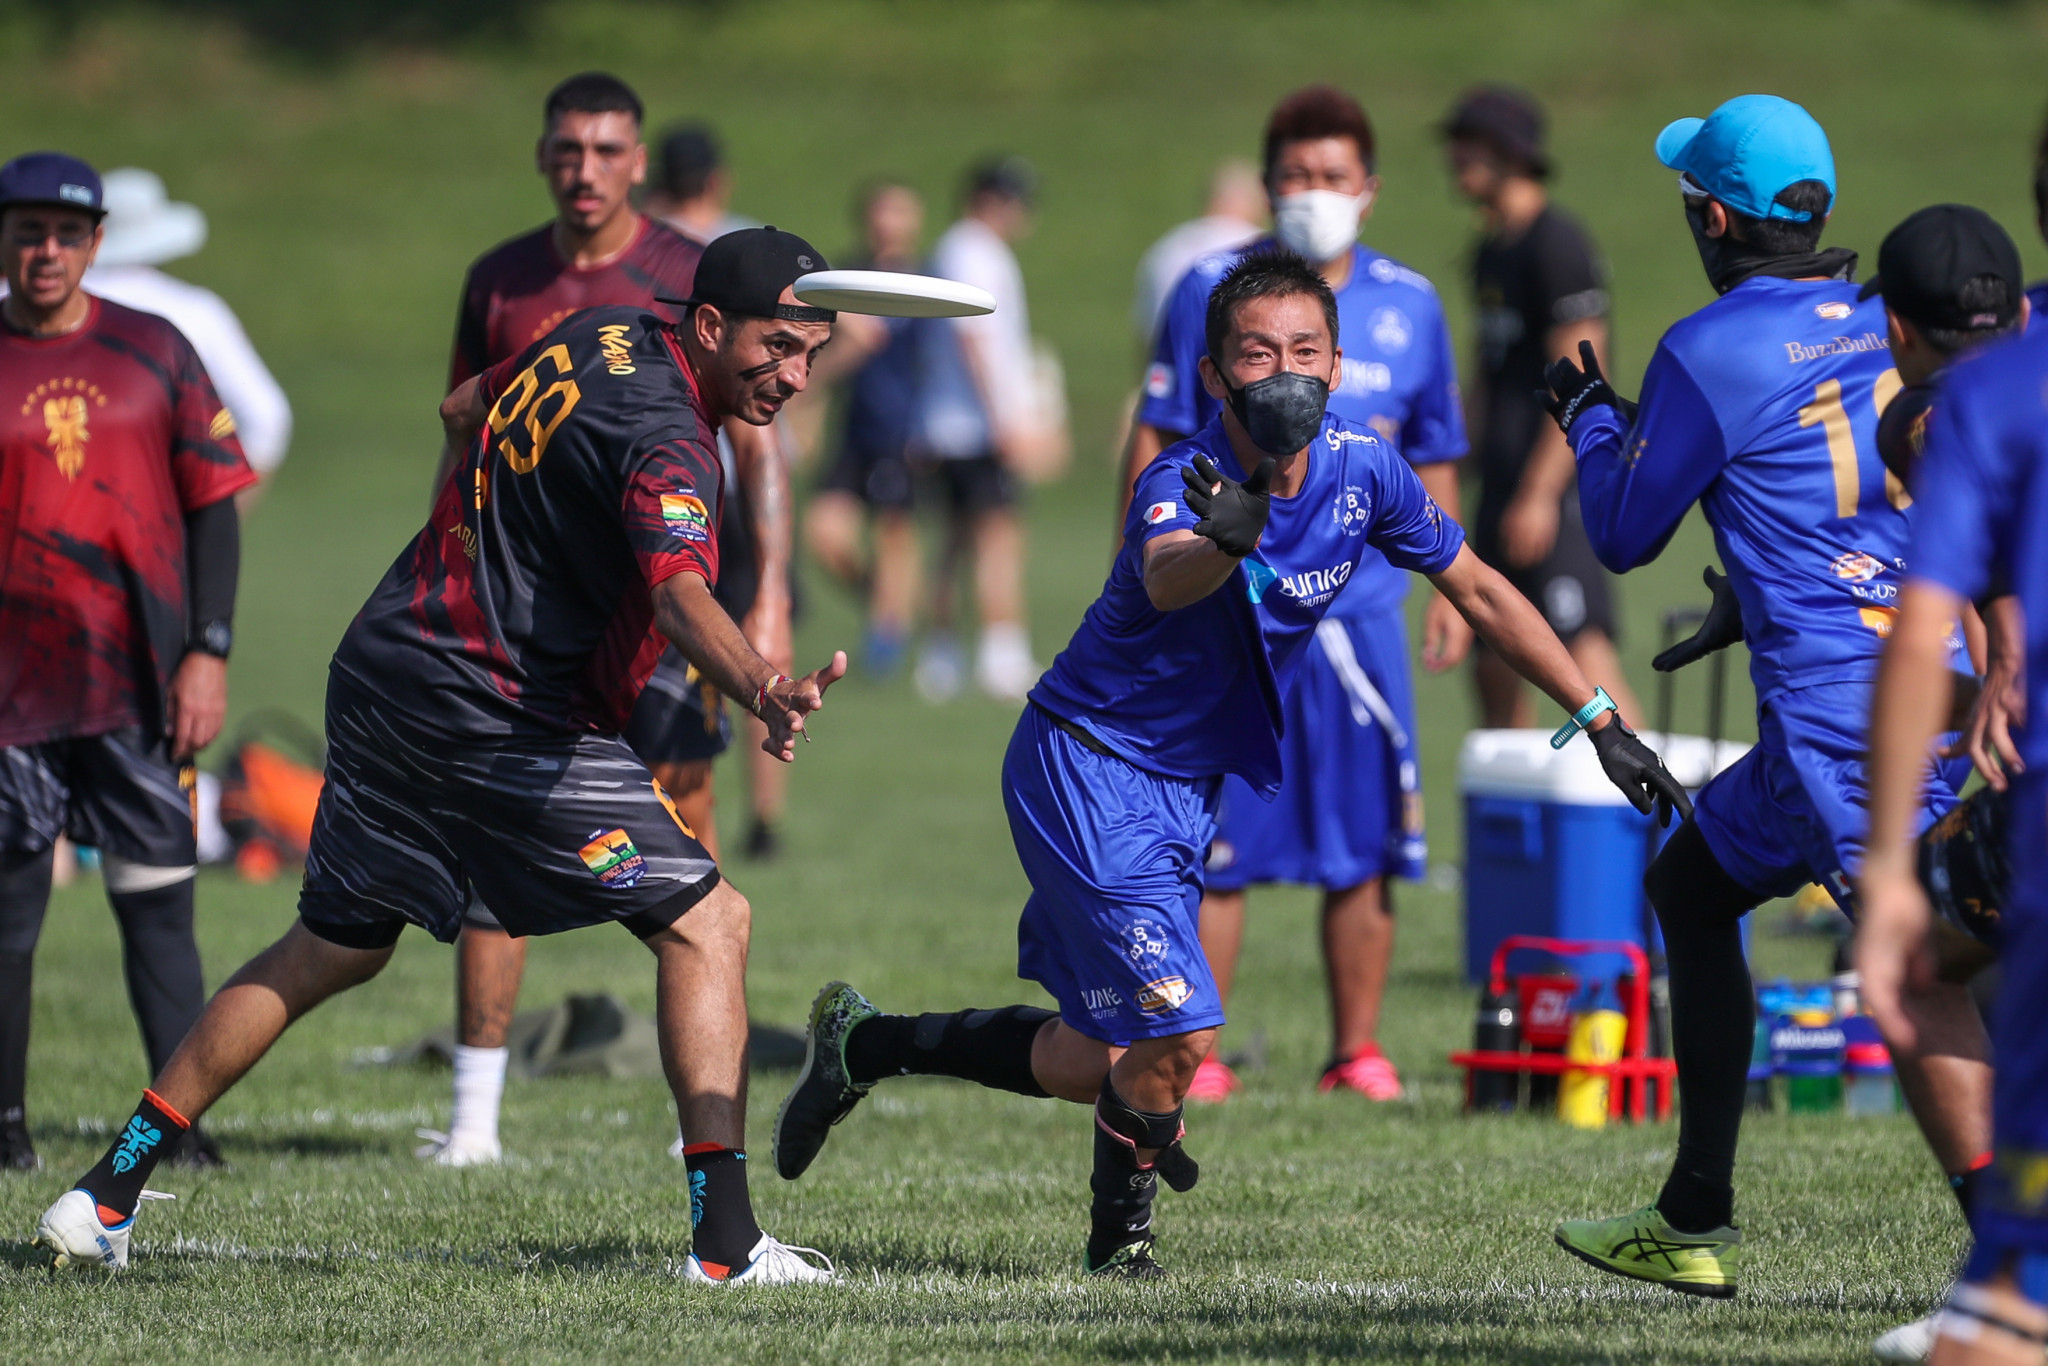 Buzz Bullets showed they are one of the teams to beat in the open event at the World Ultimate Club Championships ©Paul Rutherford for UltiPhotos